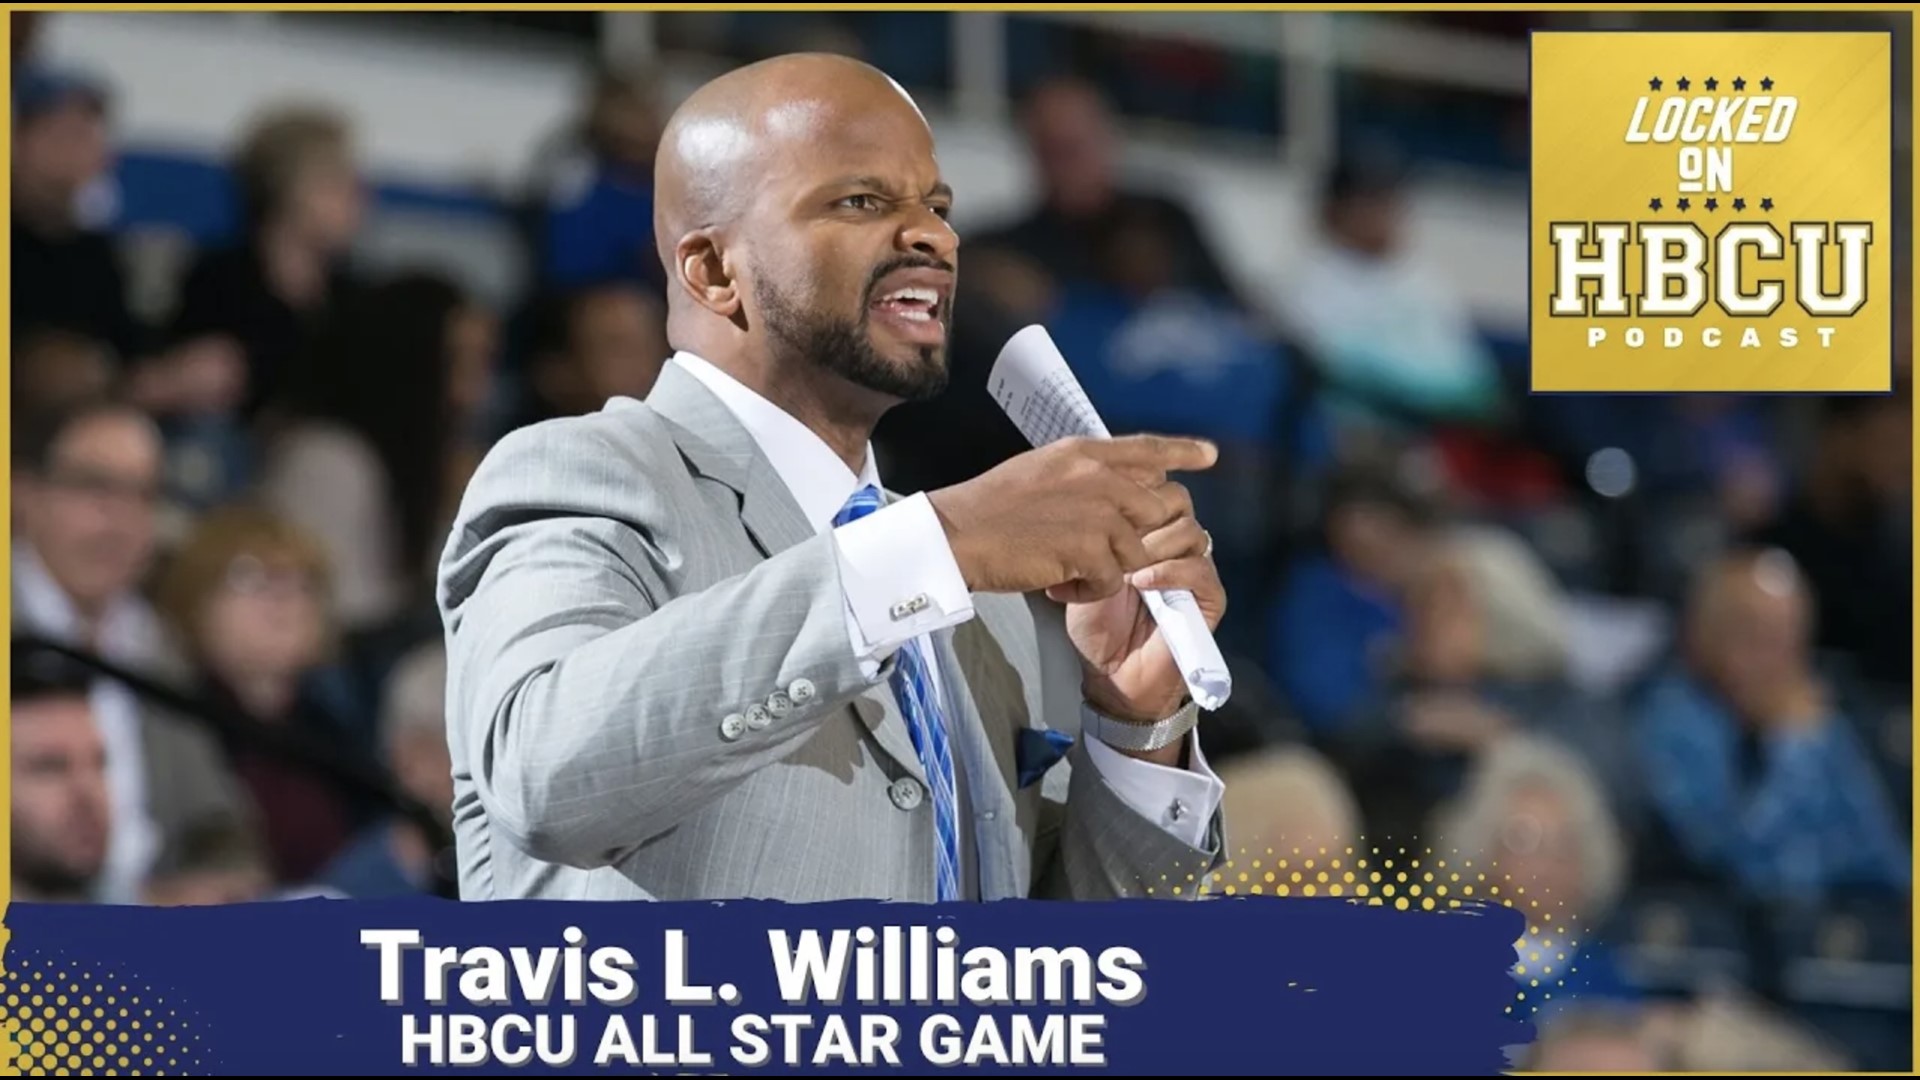 Travis L. Williams, former Tennessee State head coach and founder of HBCU All Stars, joins to discuss that past and future of the HBCU All Star Game.